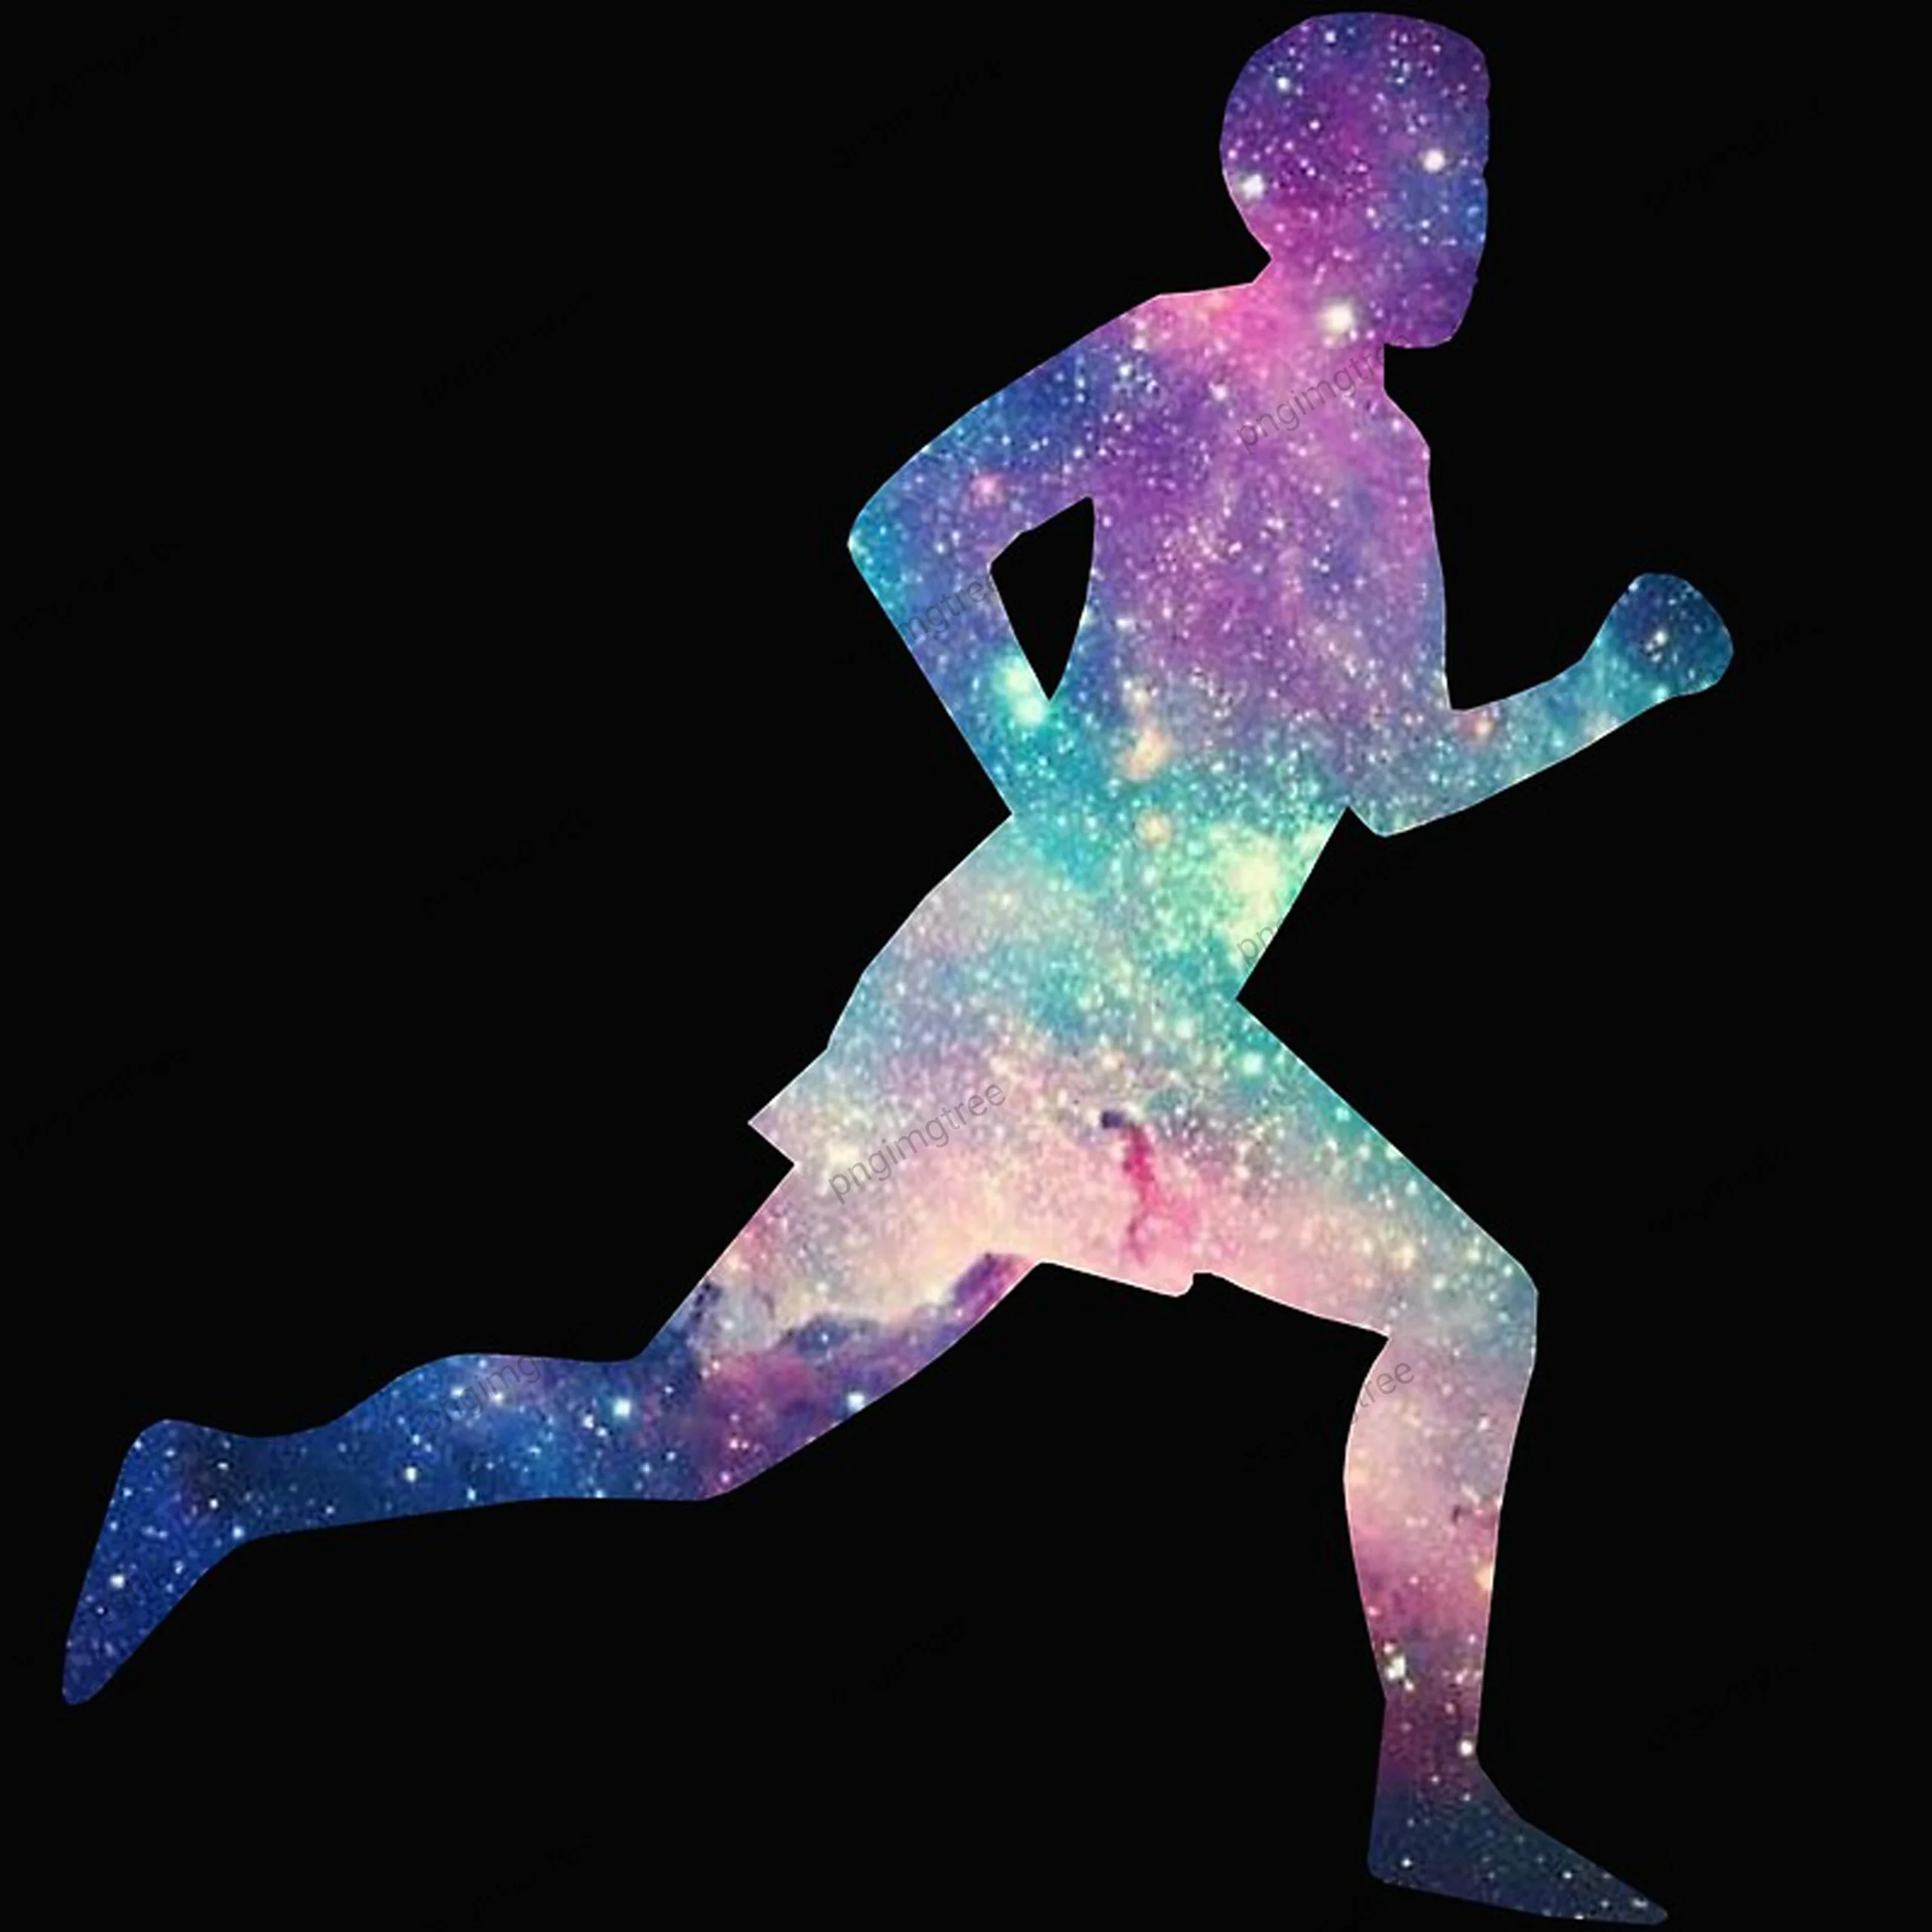 Dynamic running silhouette amid stunning purple galactic colors